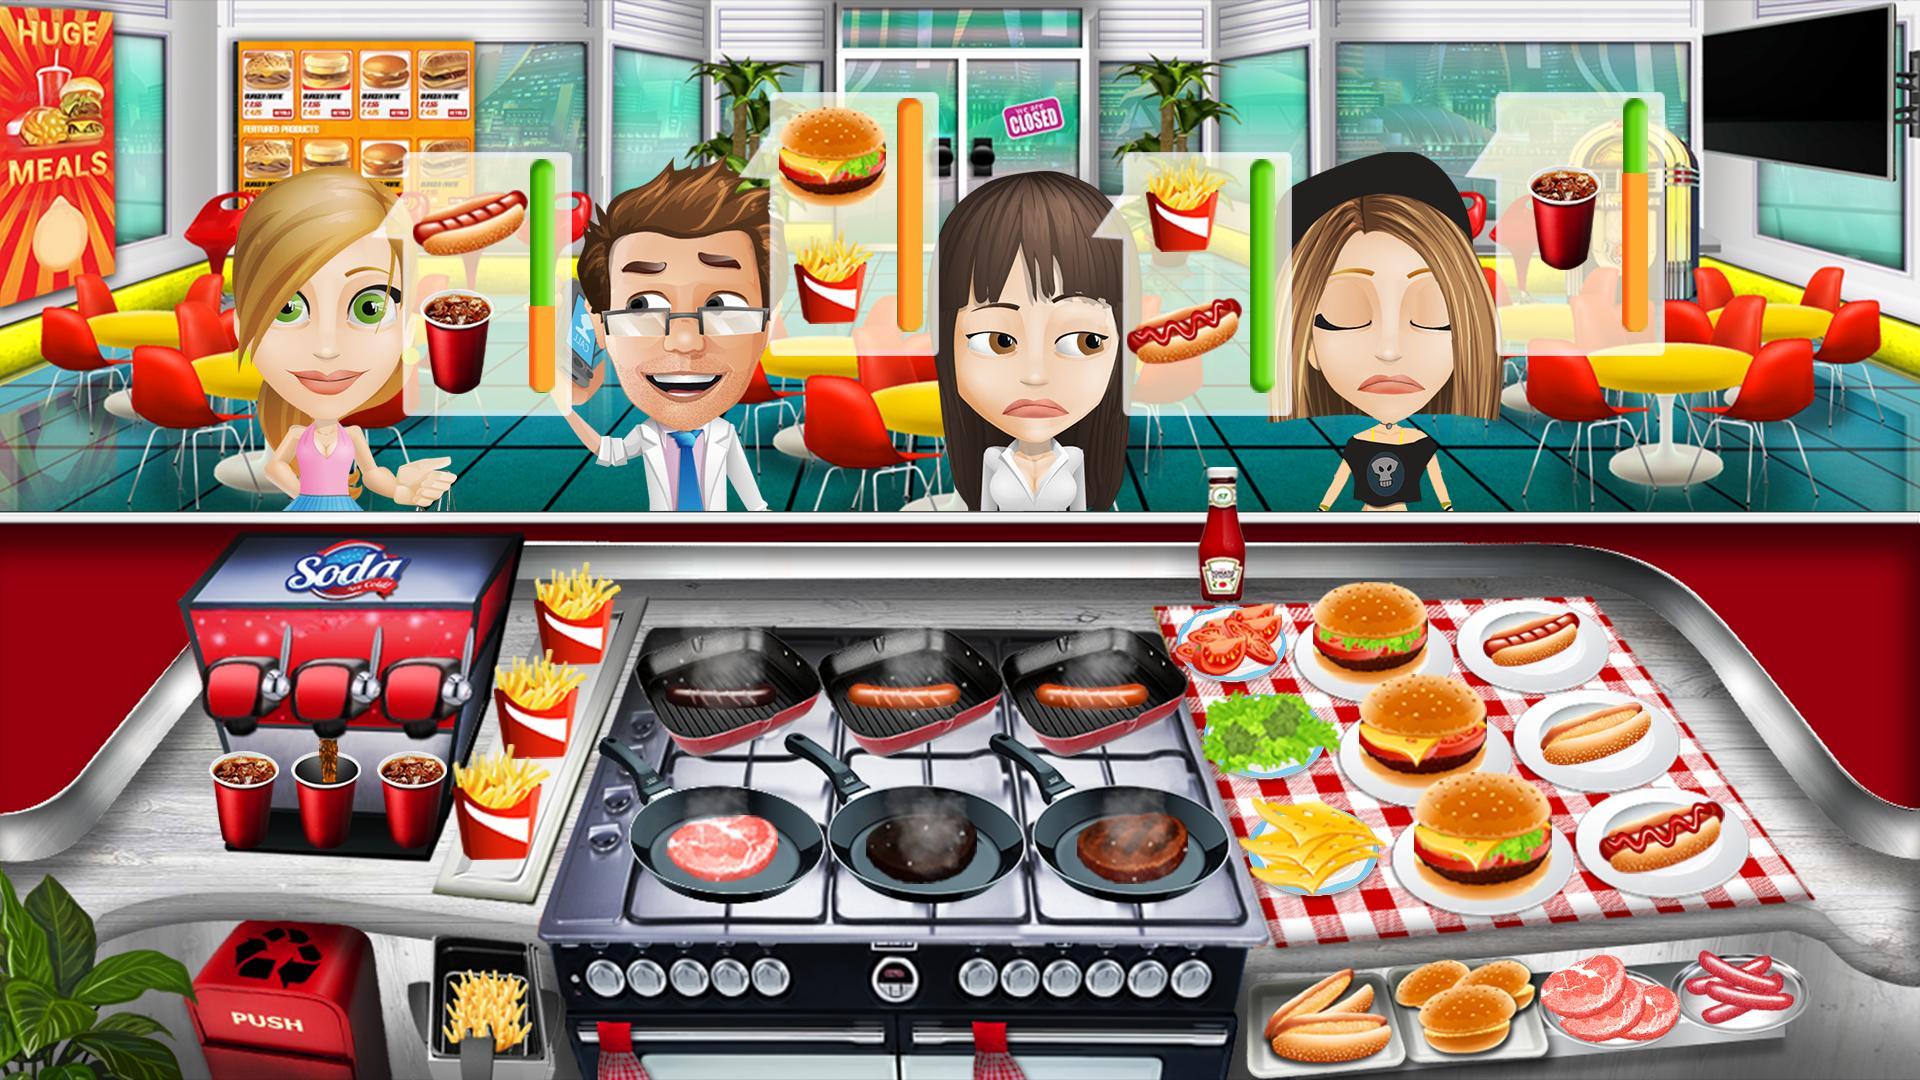 cooking fever hack android without survey